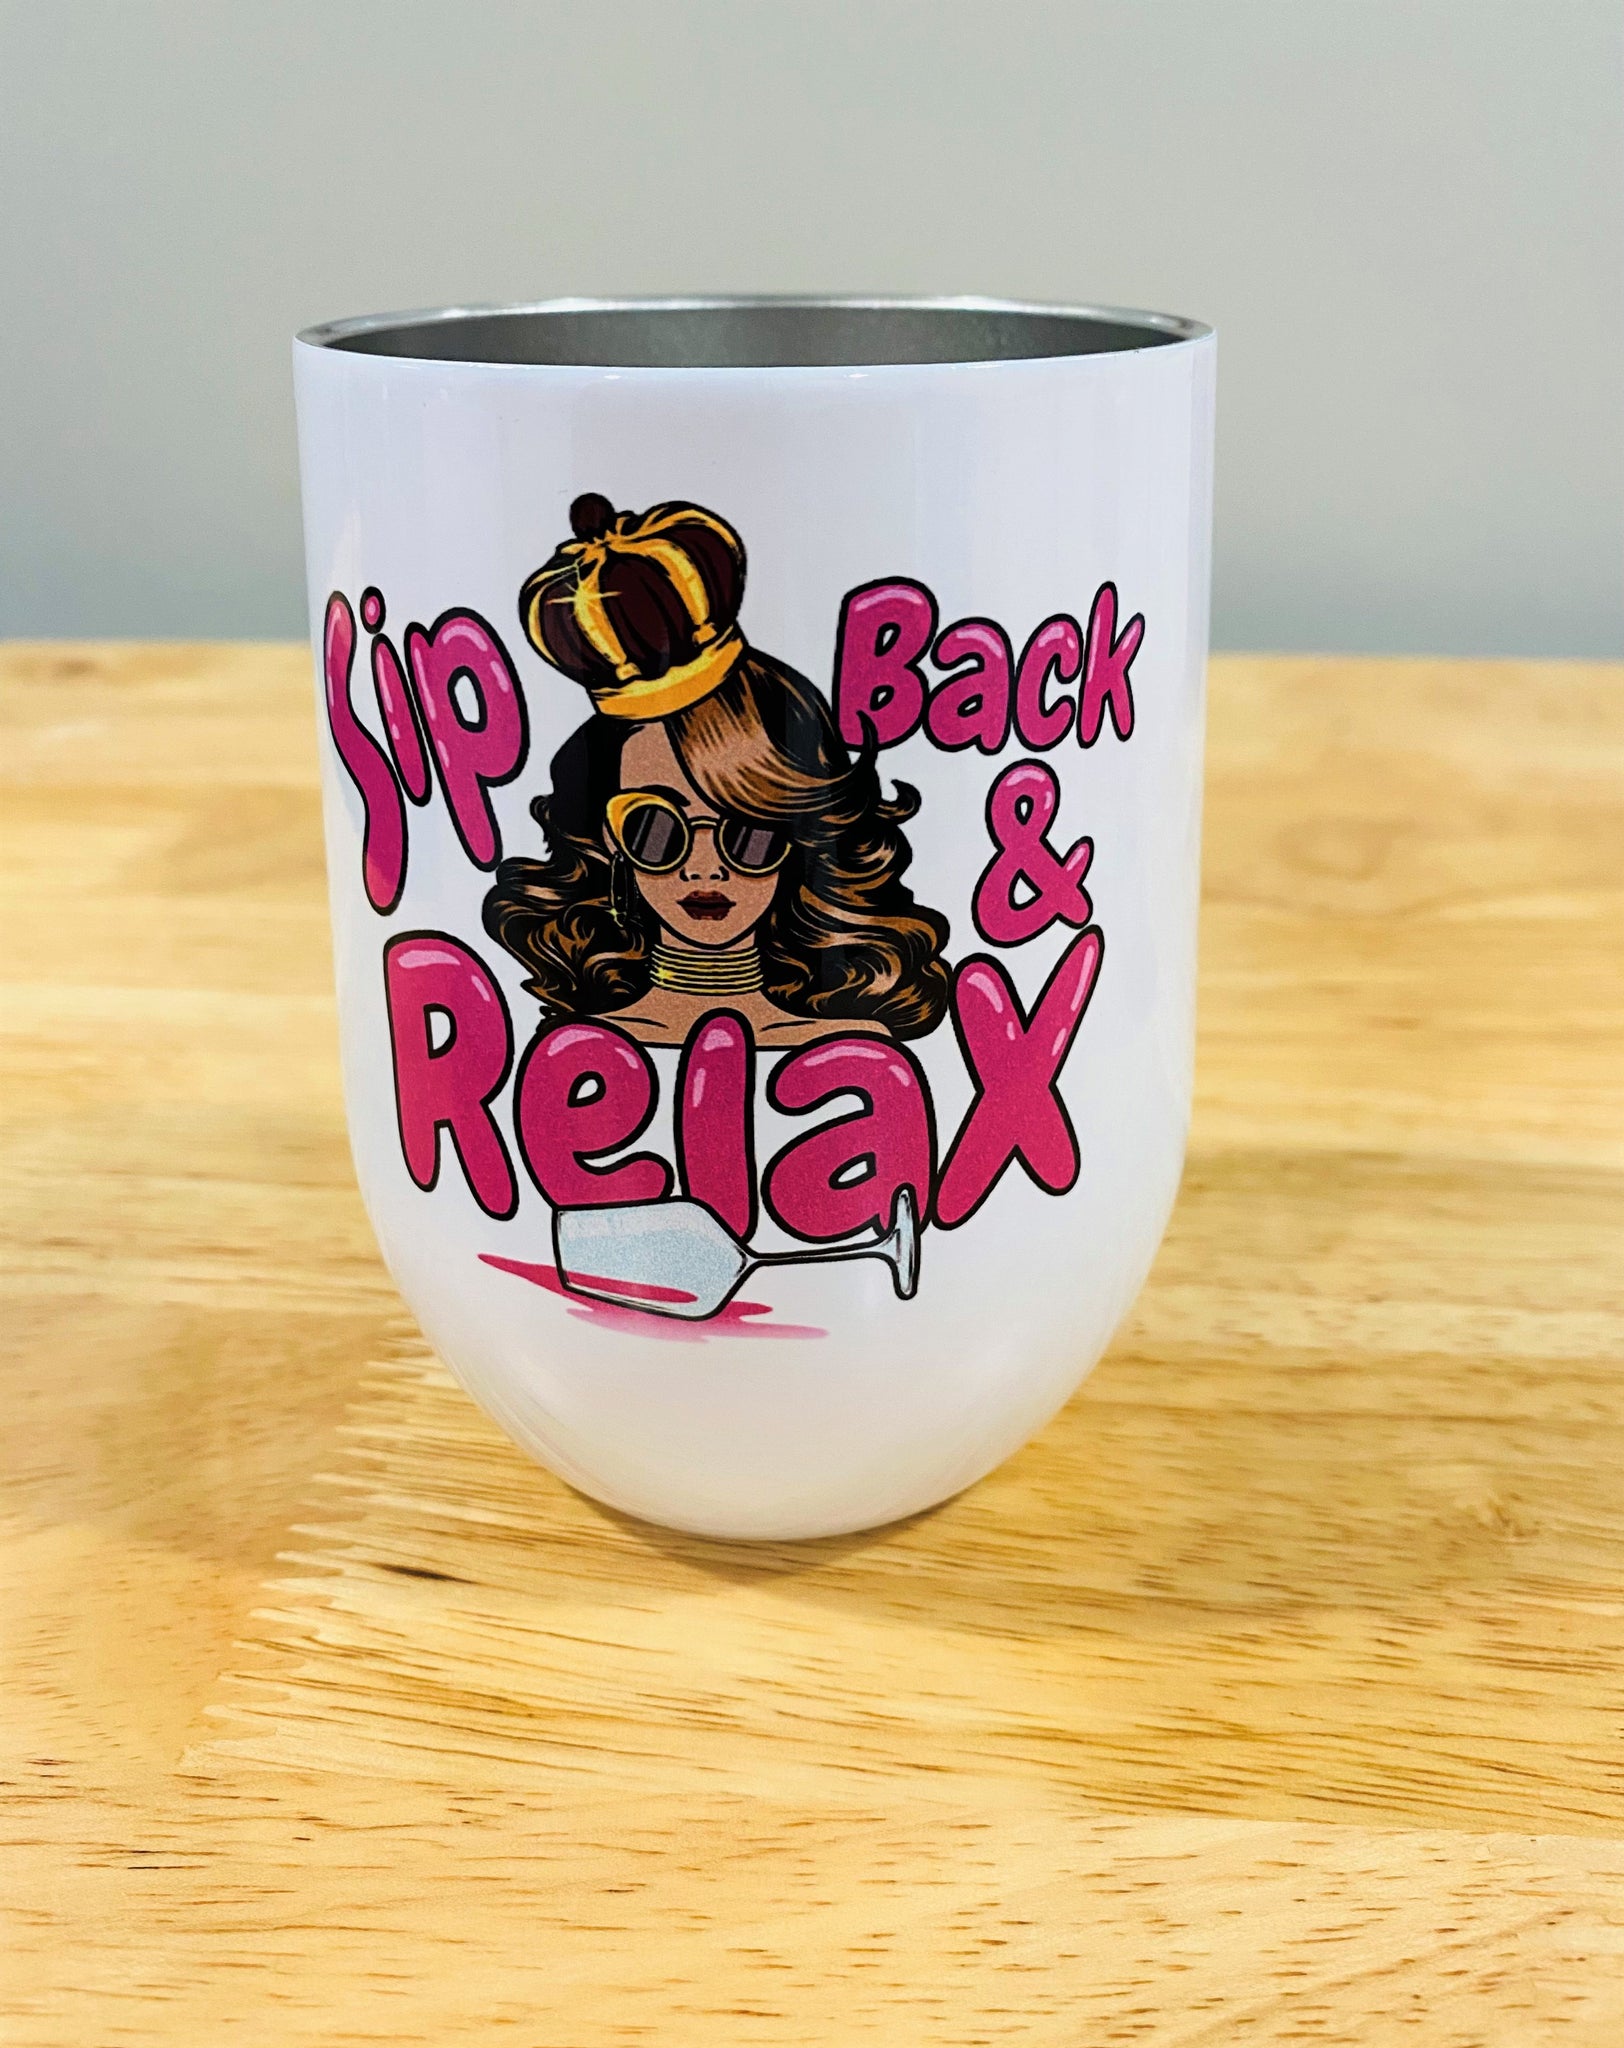 Sip Back & Relax Wine Tumbler